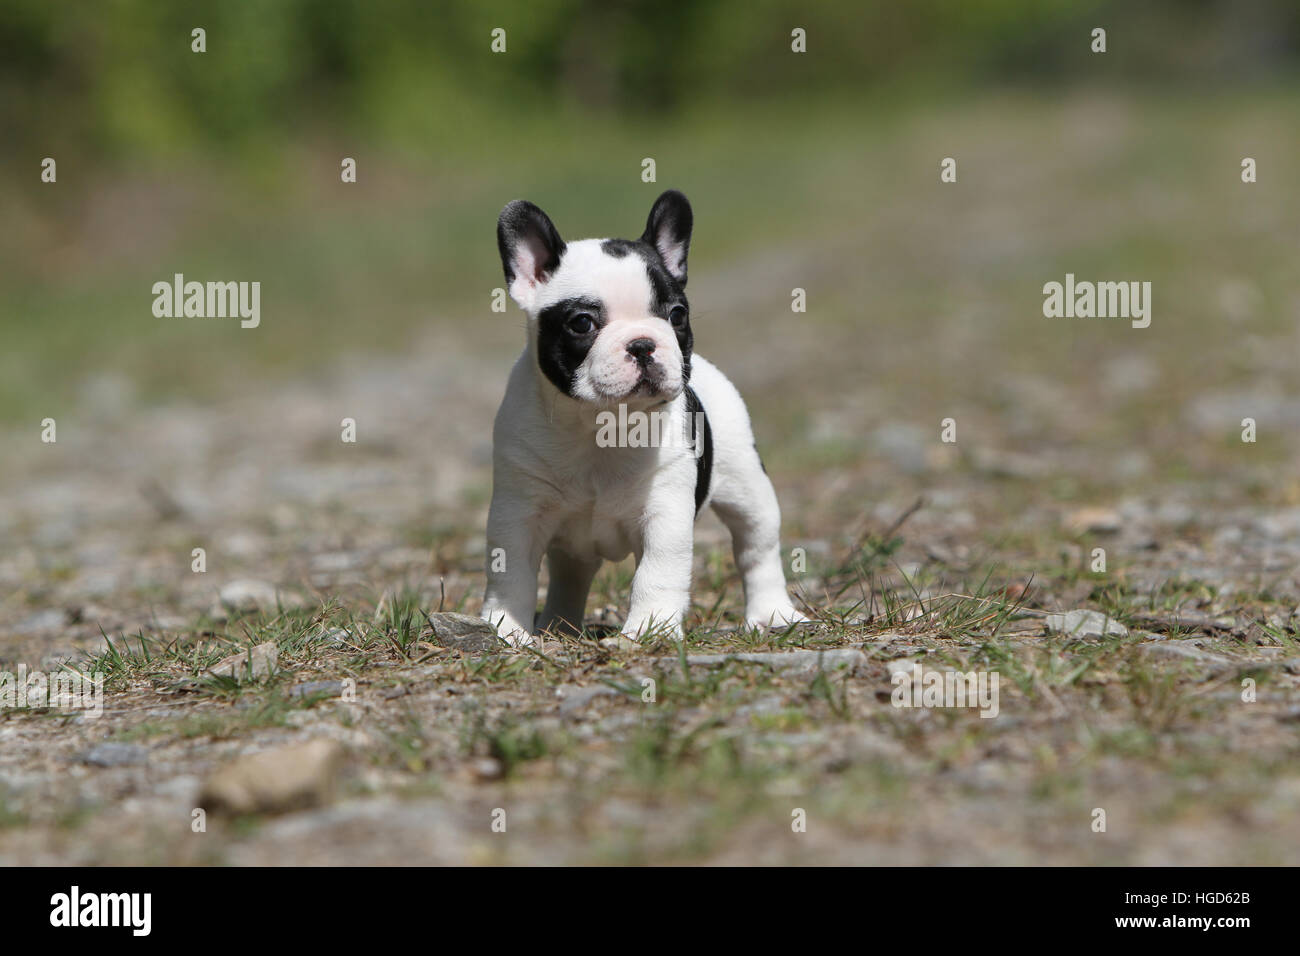 Dog French Bulldog / Bouledogue Français  Pied puppy standing face black and white Stock Photo